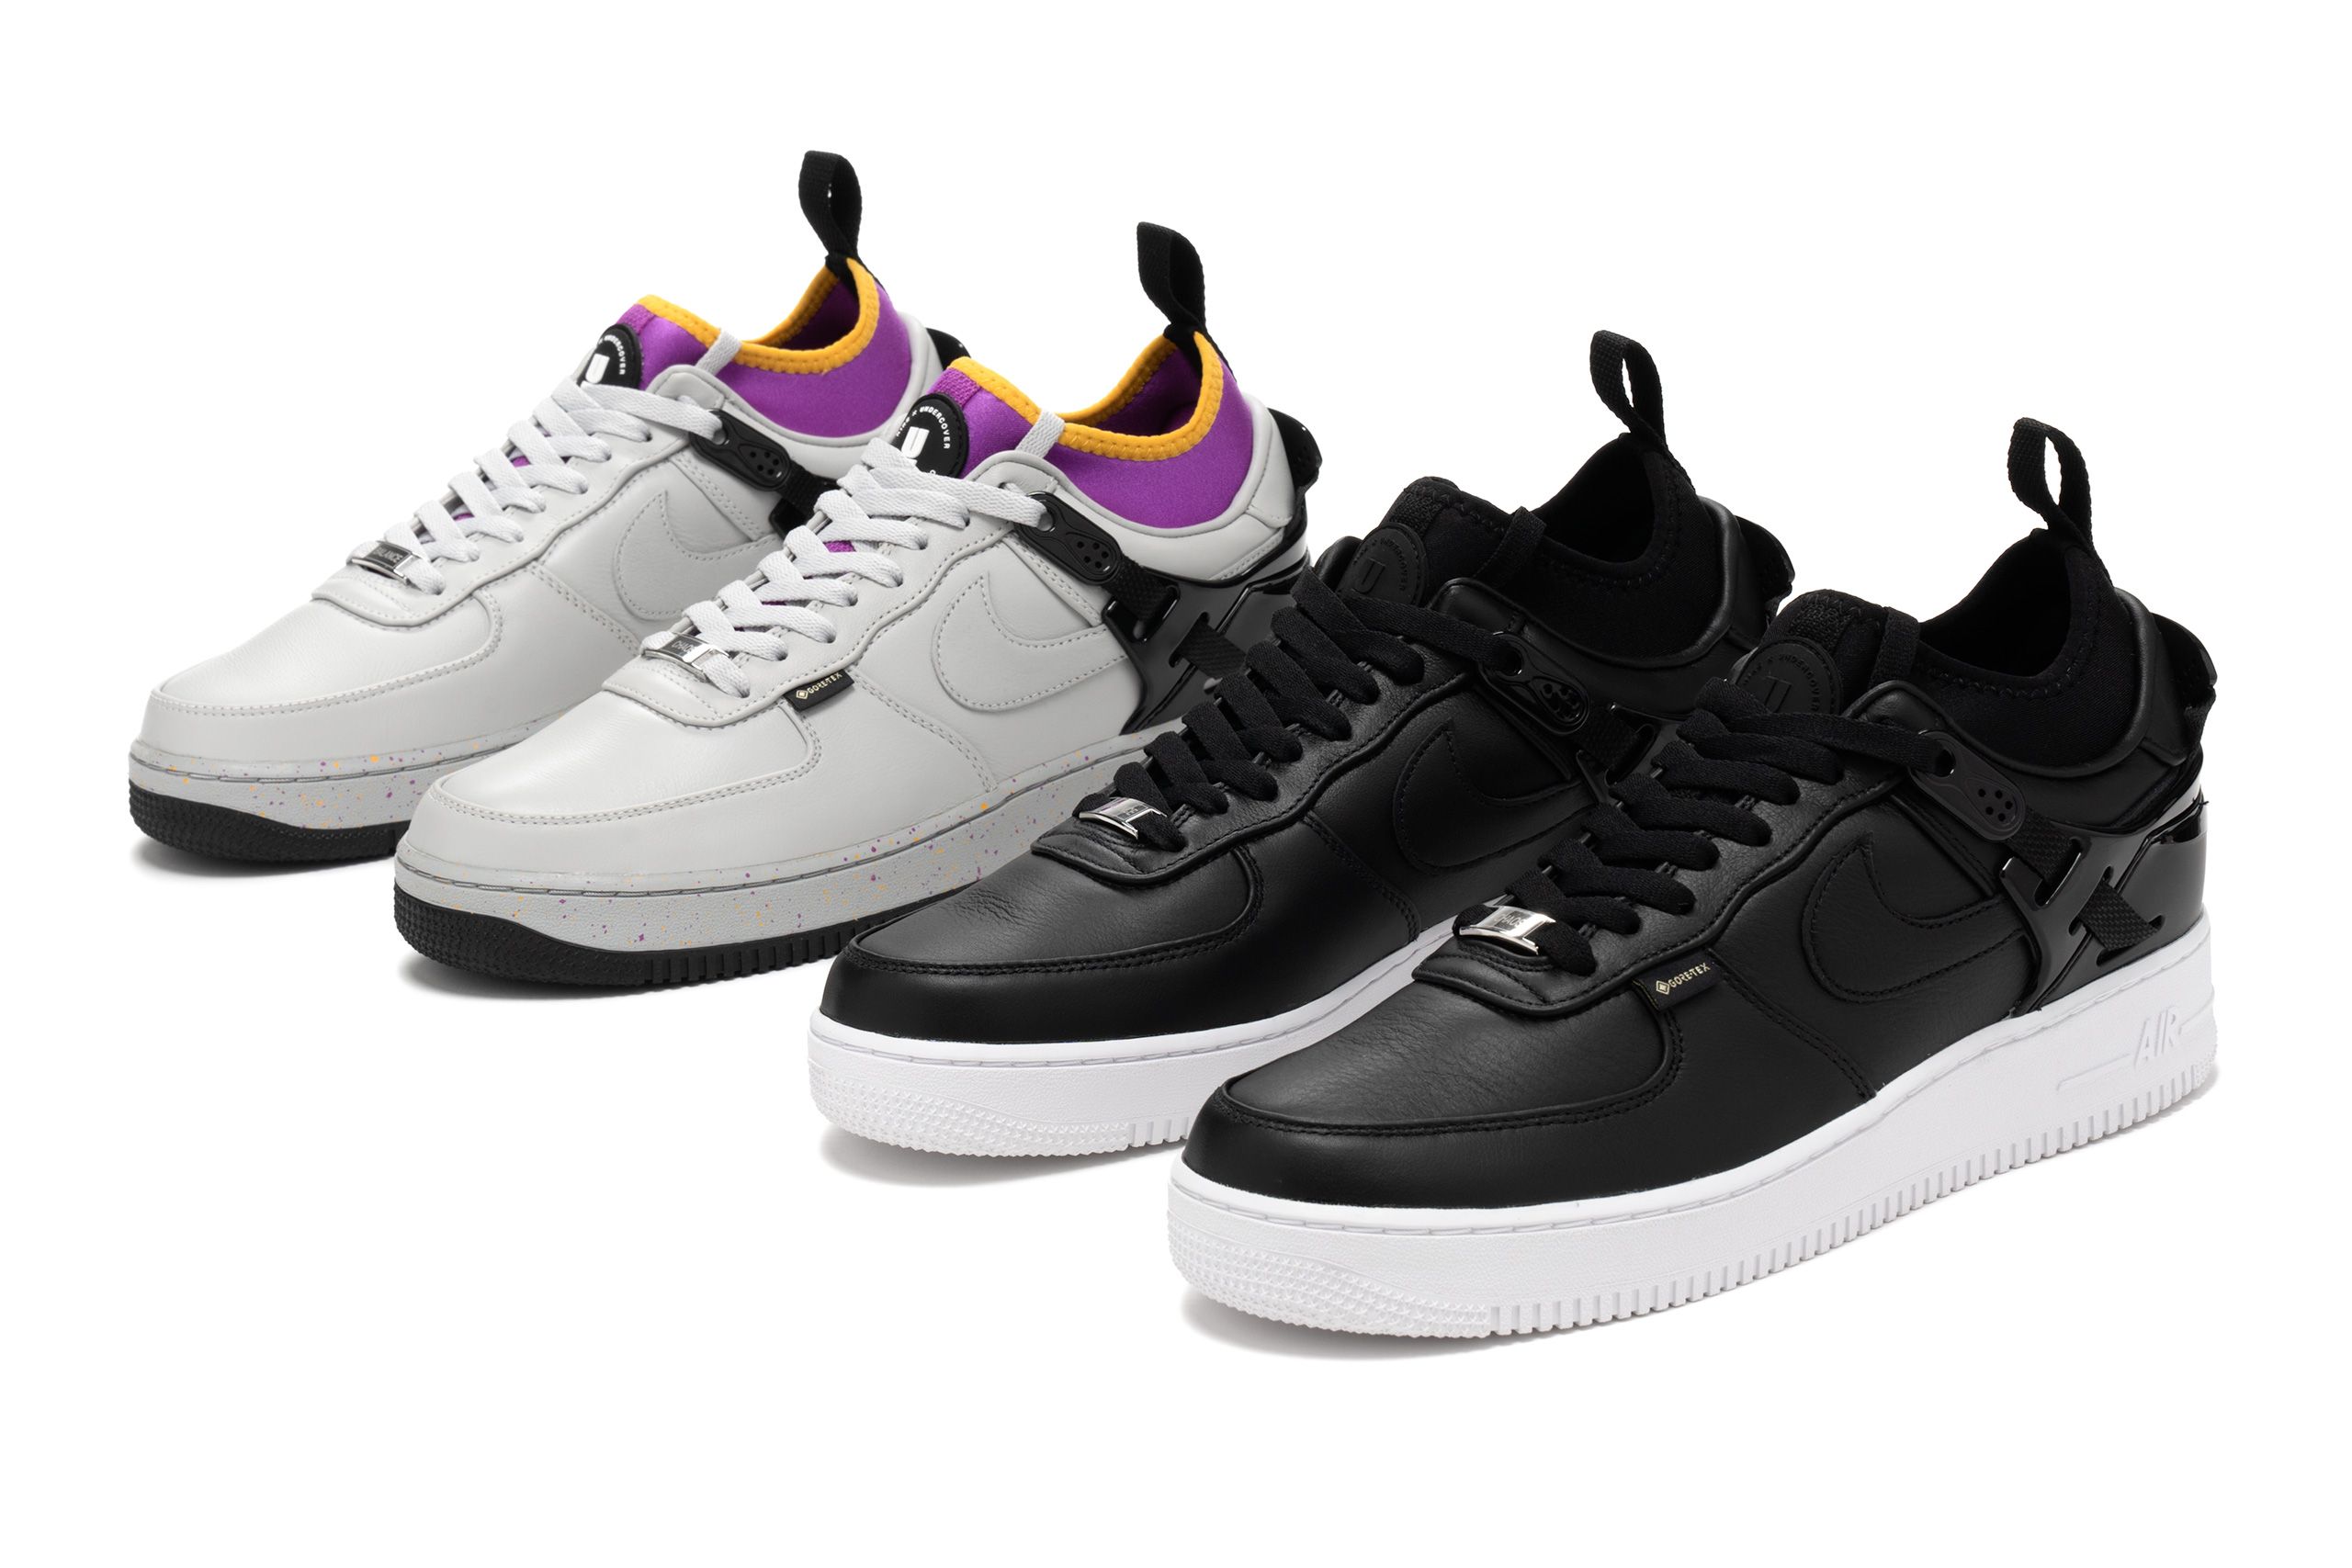 Nike x UNDERCOVER Air Force 1 Low SP | Release Date: 10.12.22 | HAVEN